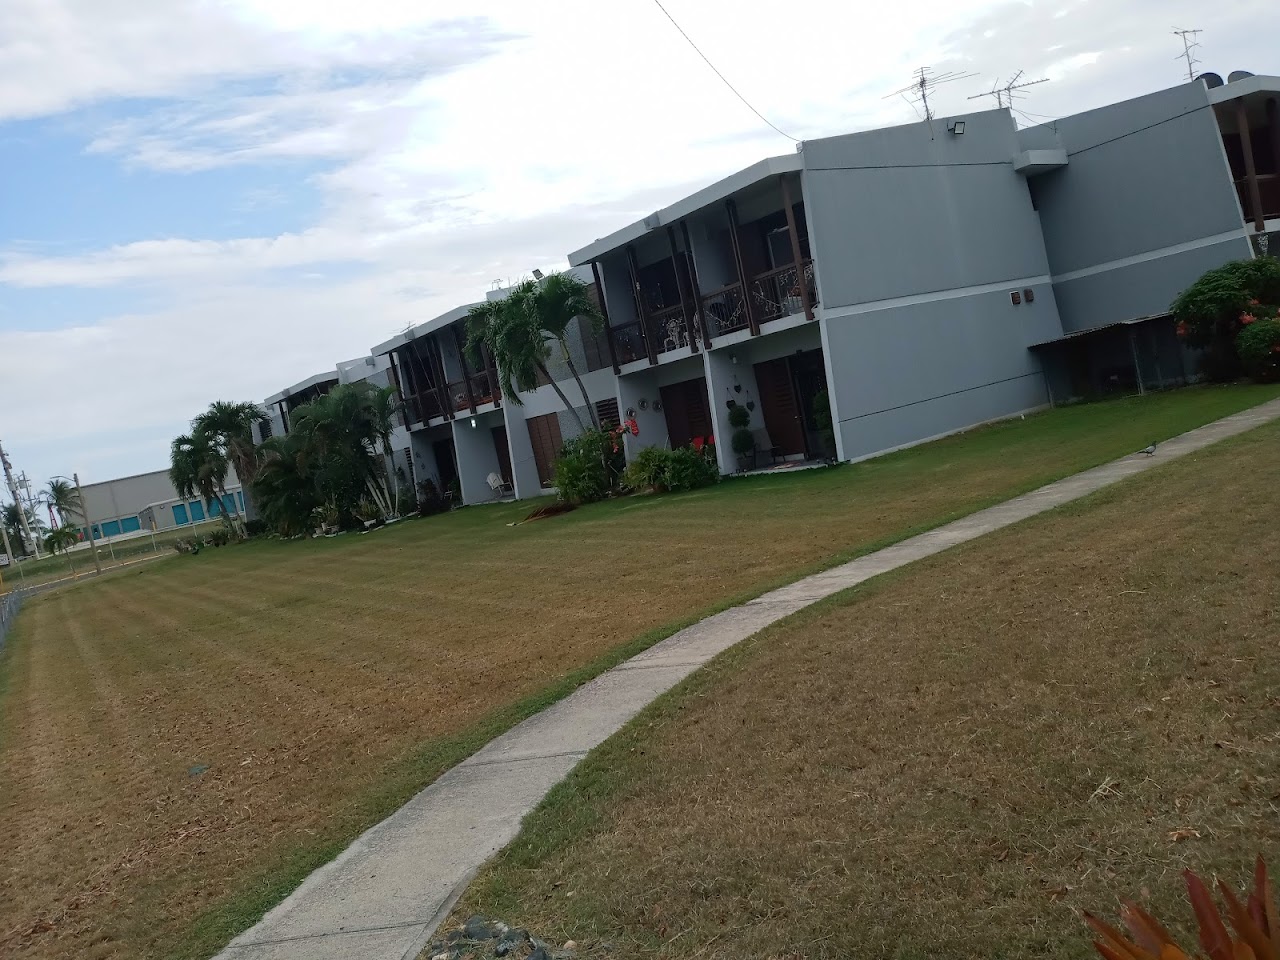 Photo of PONCE ELDERLY HOUSING DEVELOPMENT I. Affordable housing located at 144 VILLA FINAL ST PONCE, PR 